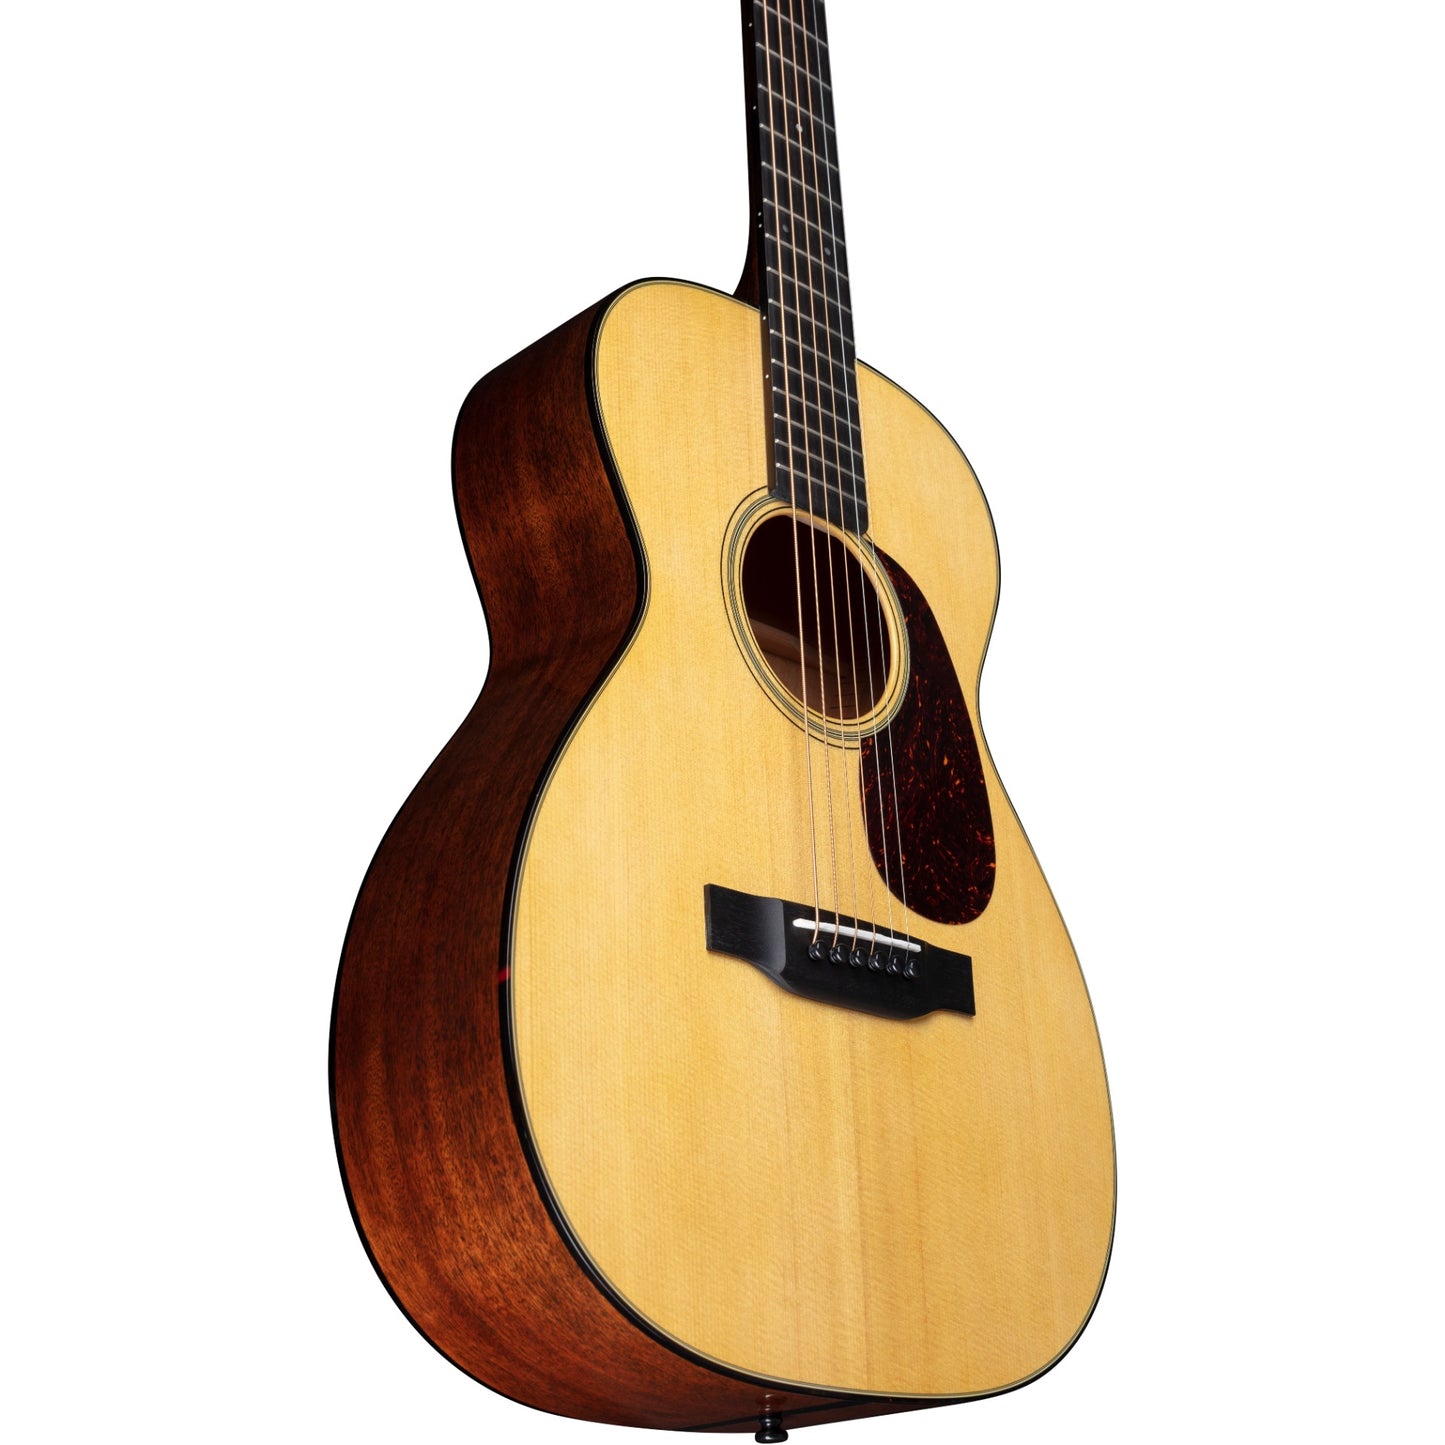 Martin 018 Standard Series Acoustic Guitar with Case